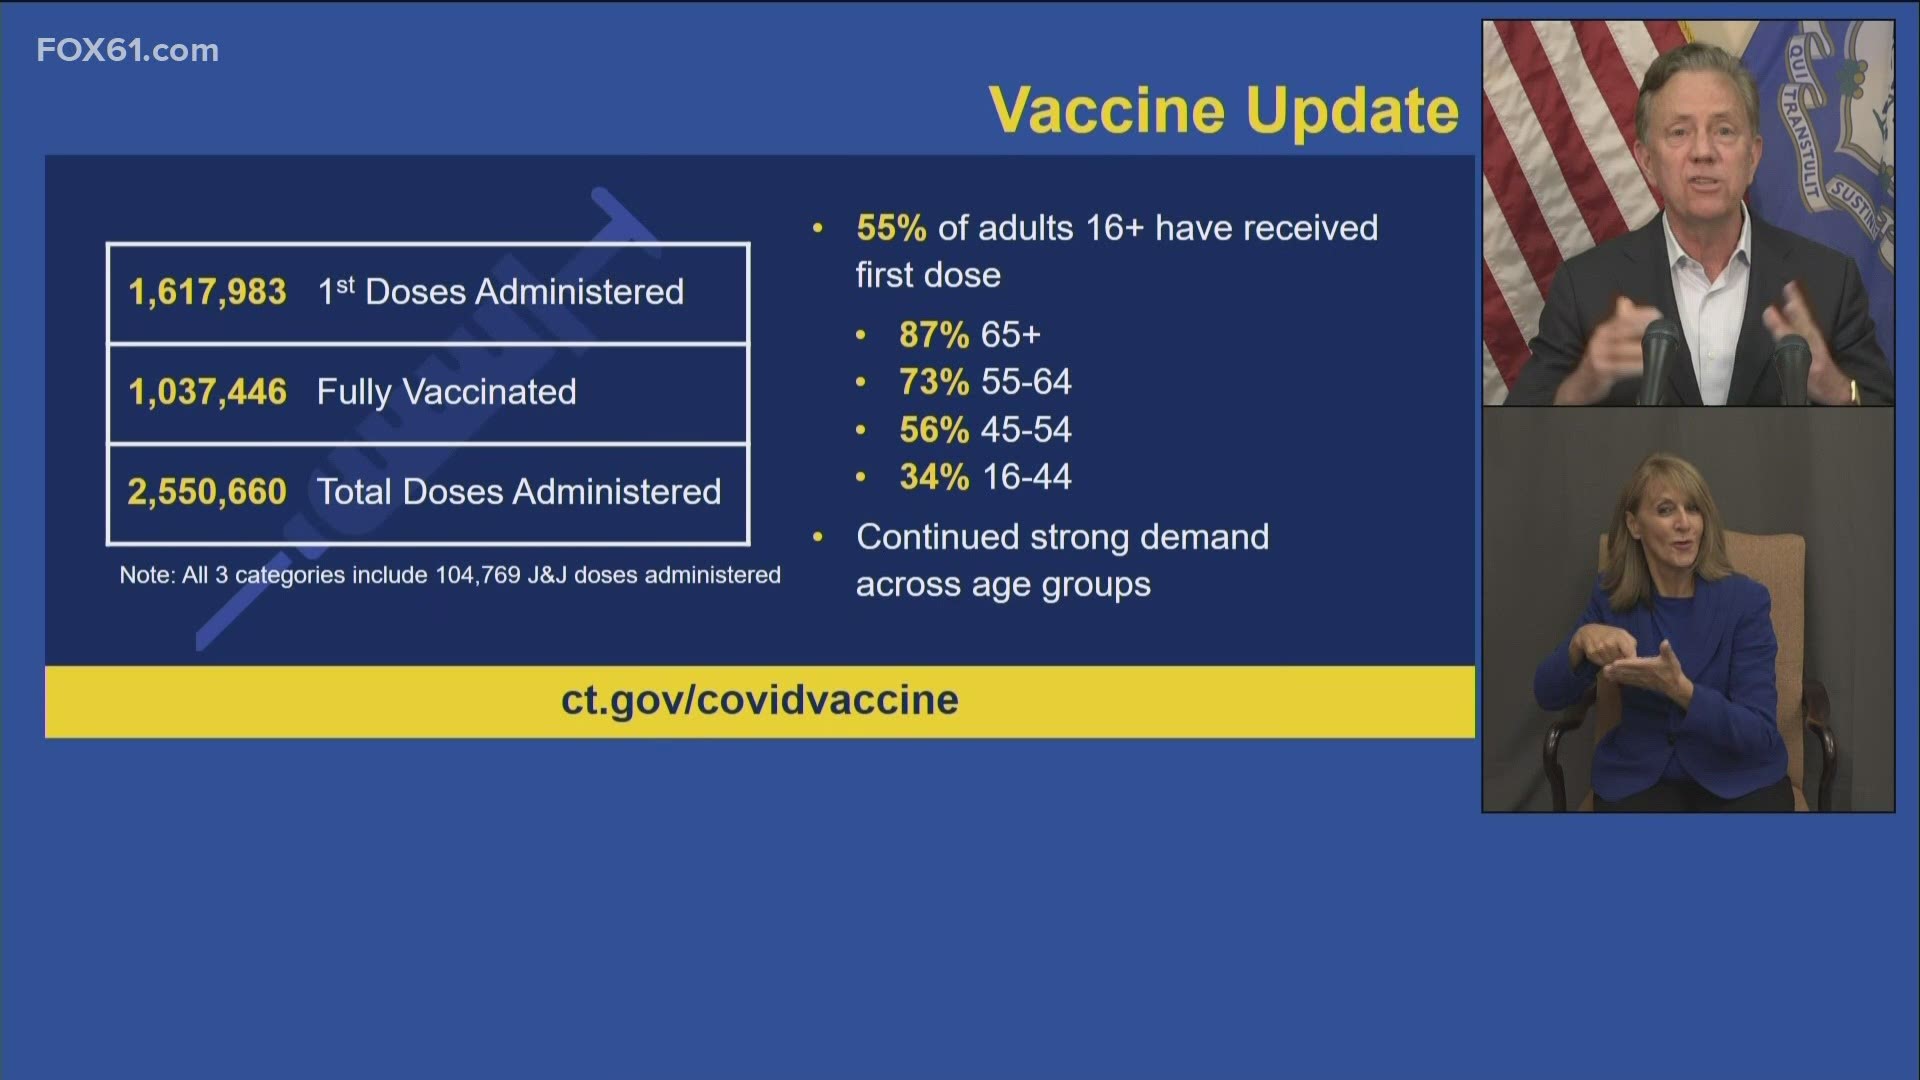 Over one million have been fully vaccinated